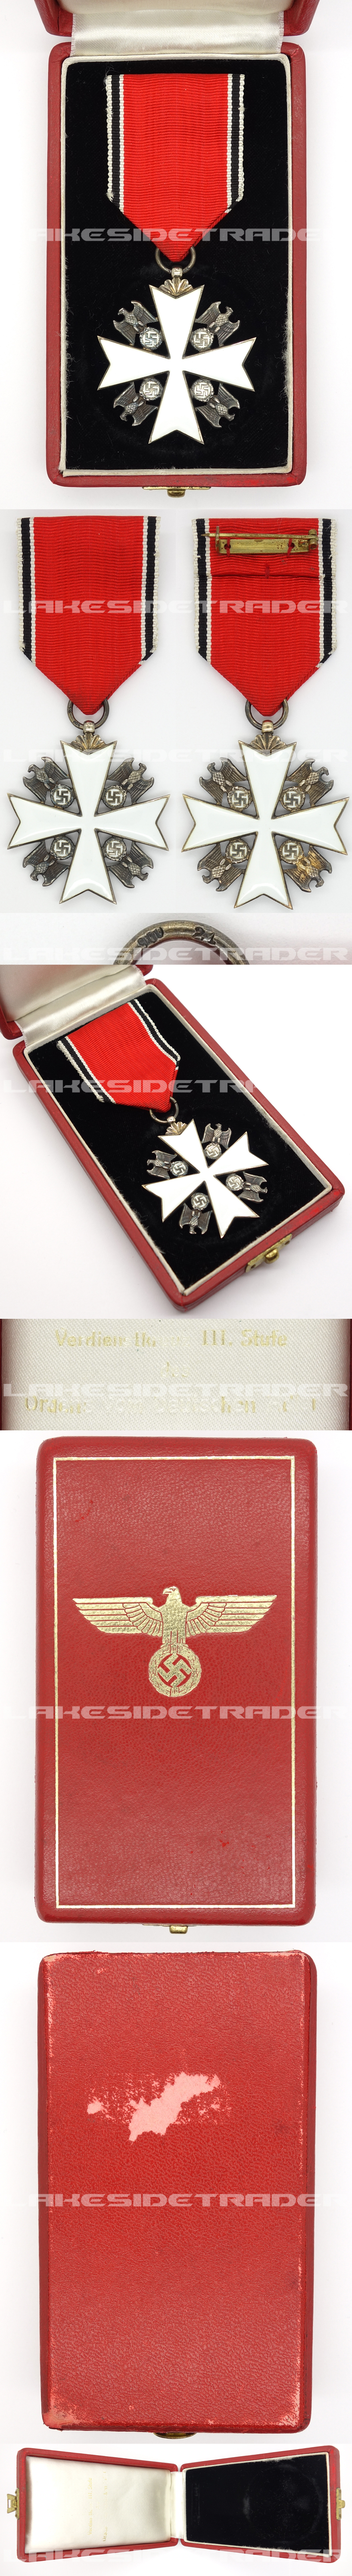 Cased Order of the German Eagle 3rd Class by Godet